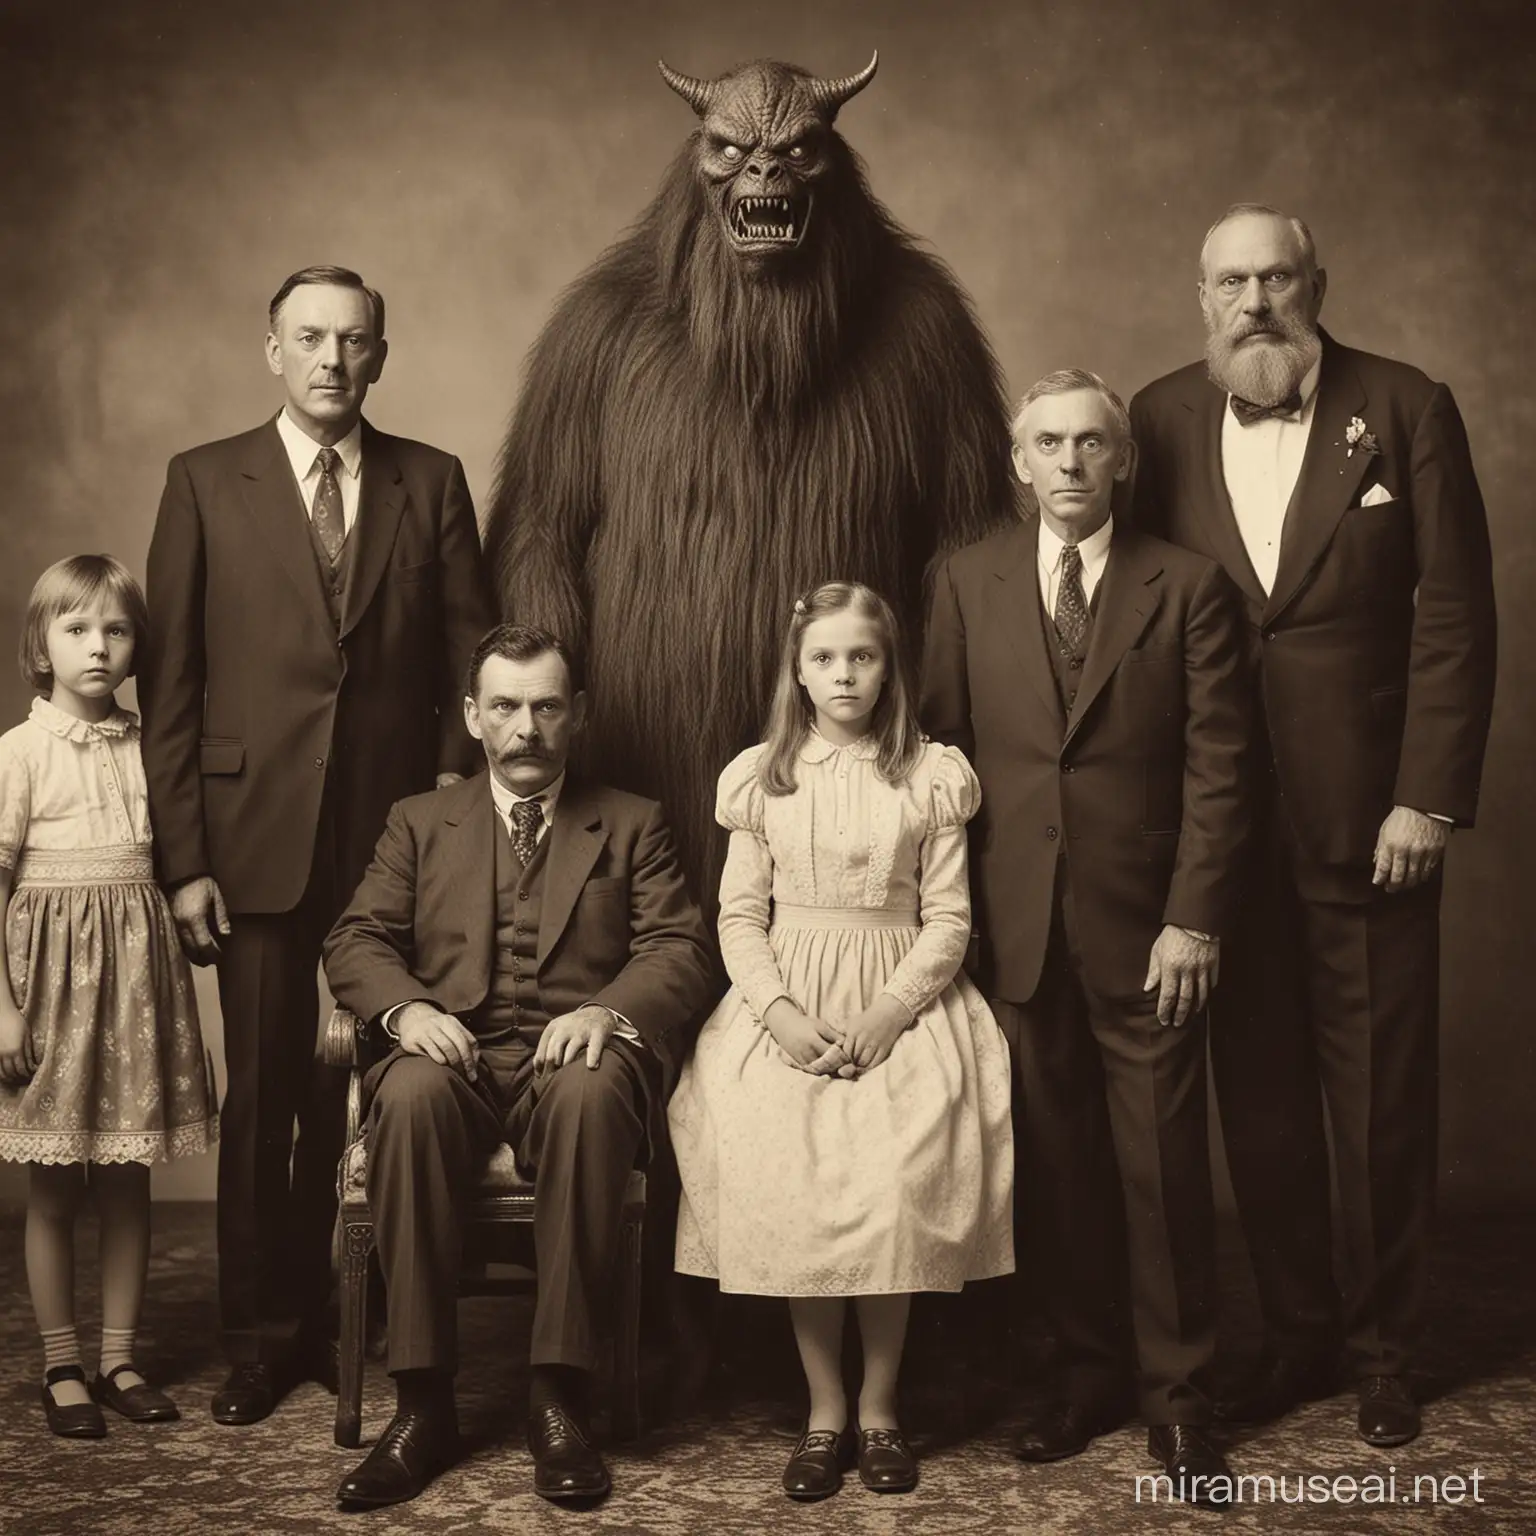 creepy family picture. they are mix of human and monsters